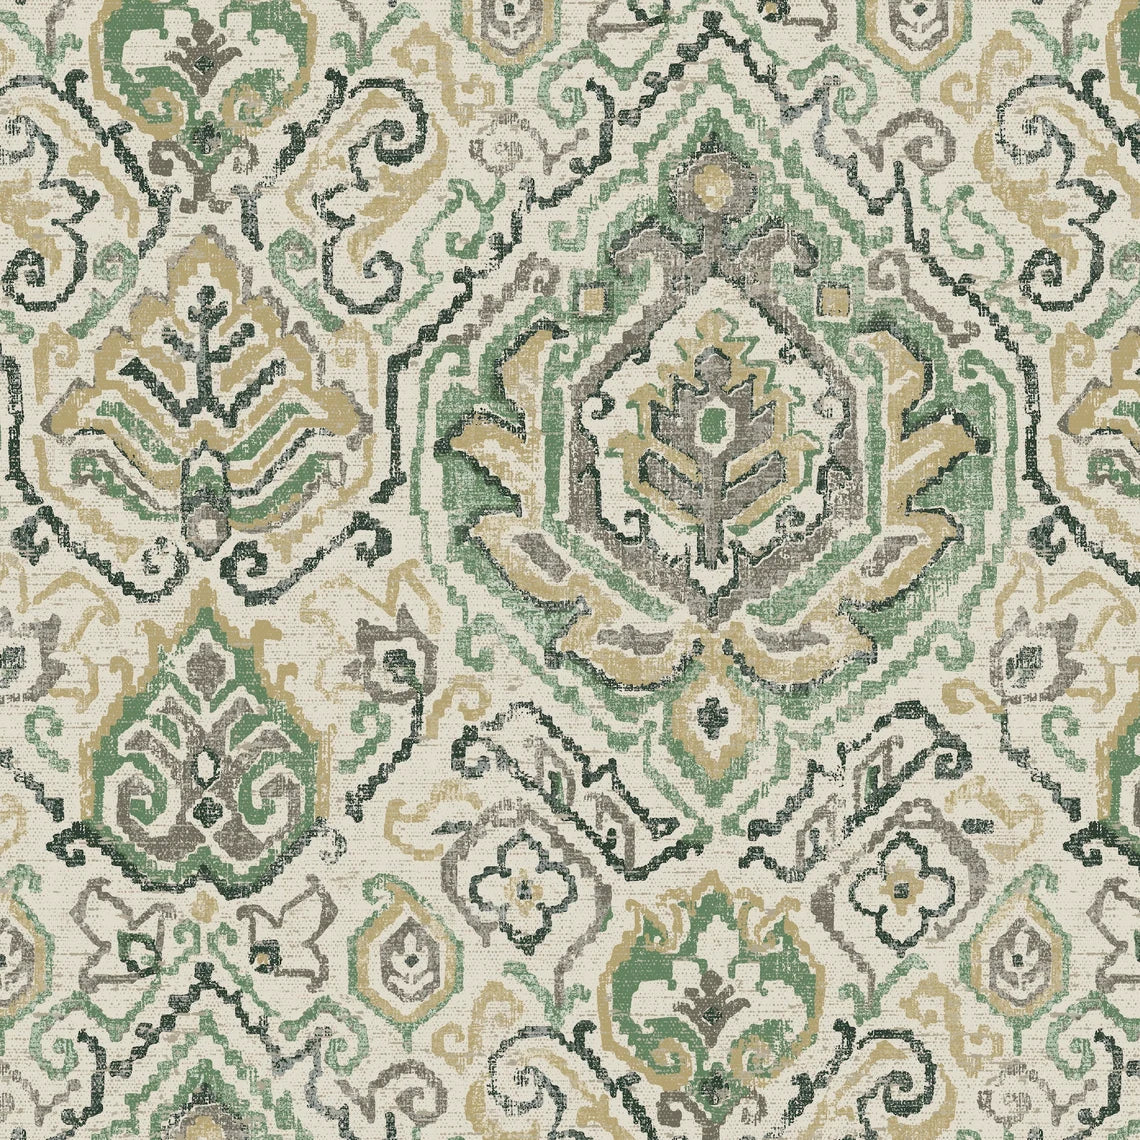 Duvet Cover in Cathell Meadow Green Medallion Weathered Persian Rug Design- Large Scale